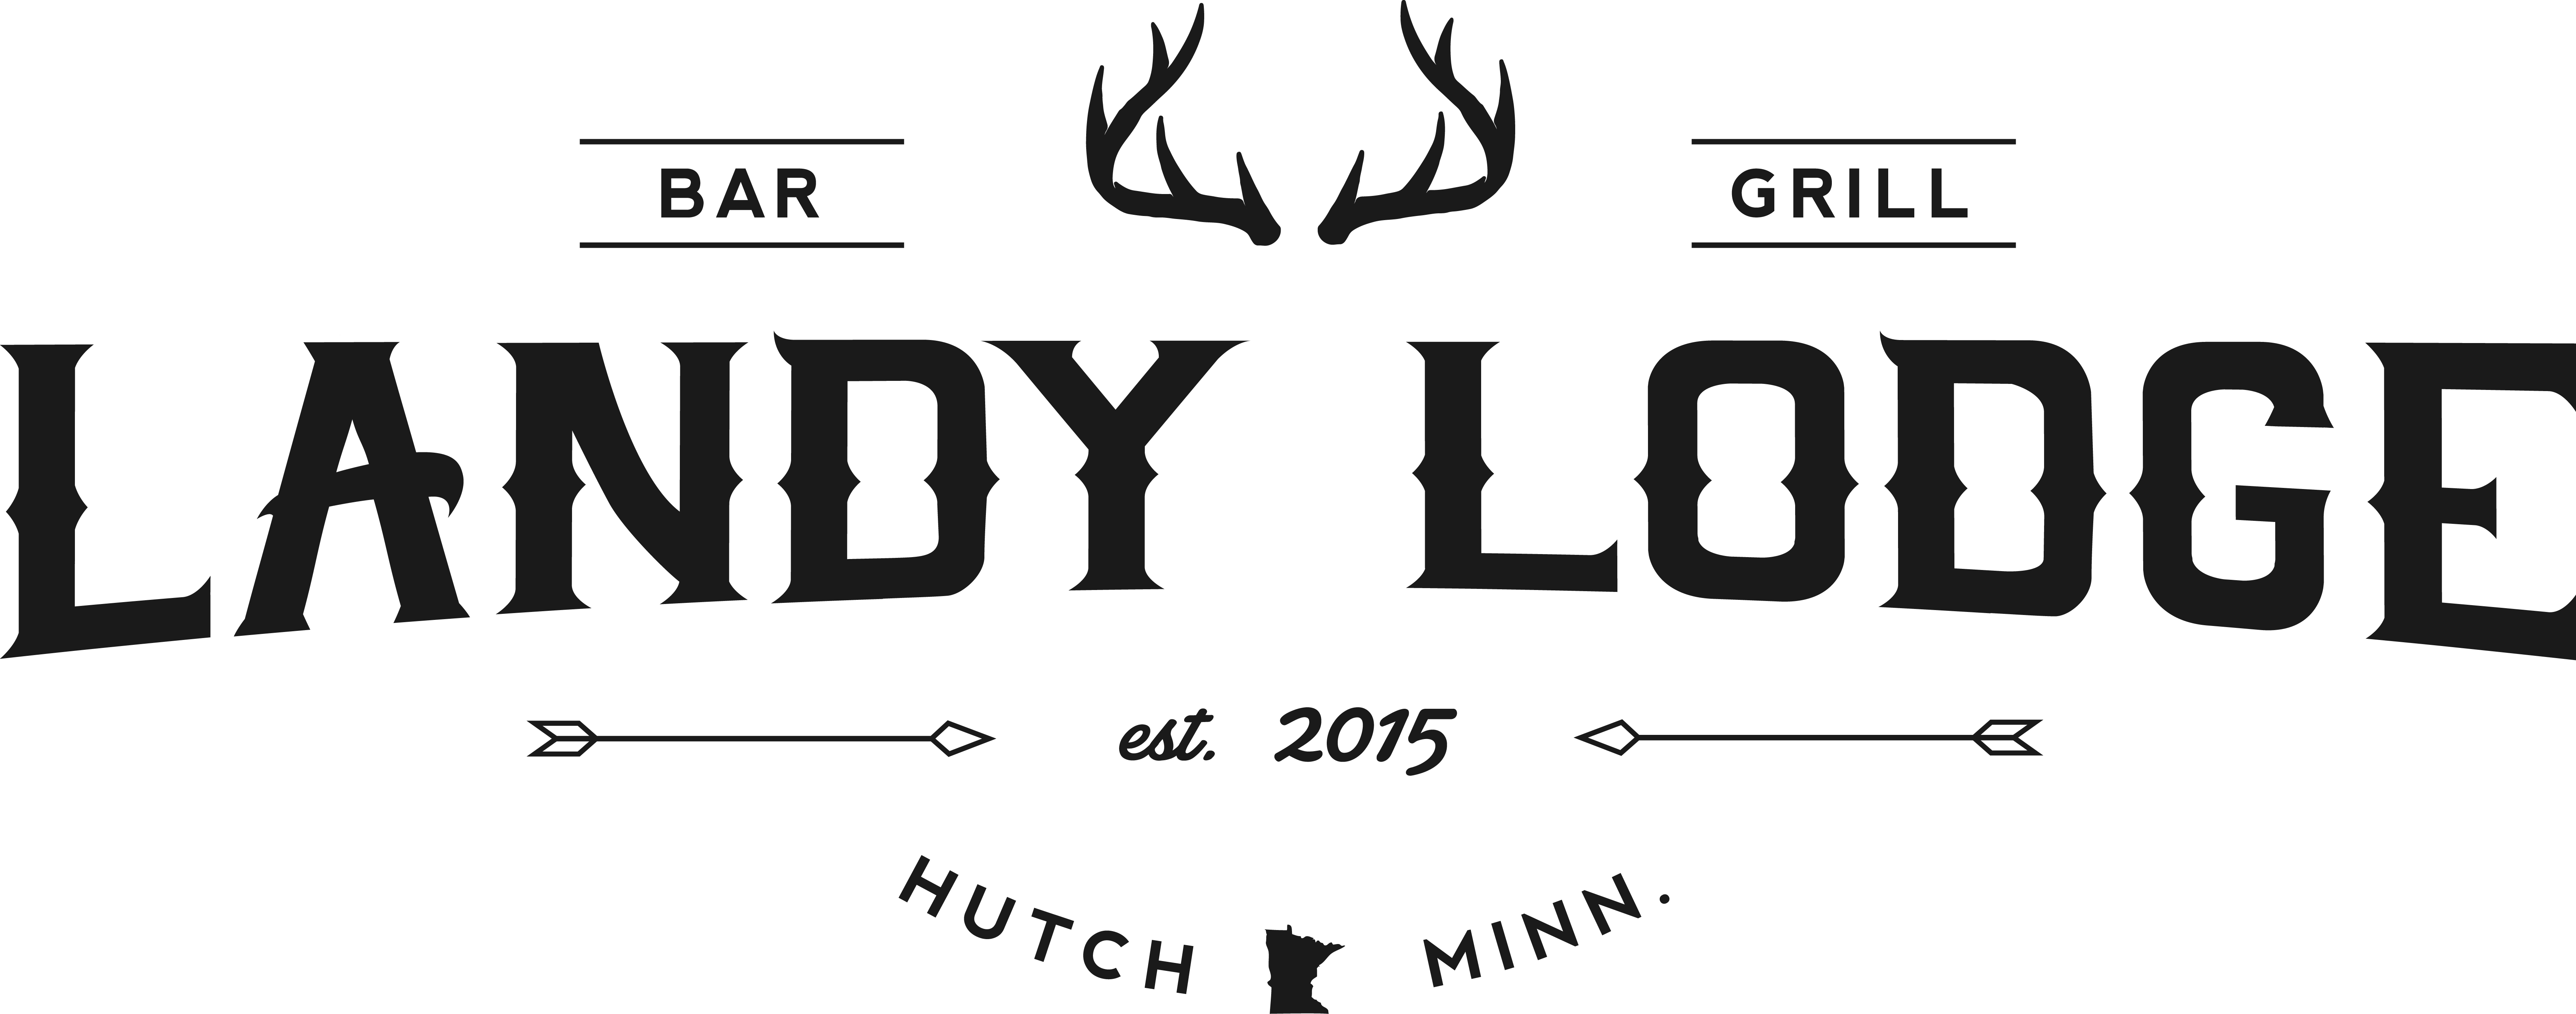 Business Logo for Landy Lodge Bar & Grill